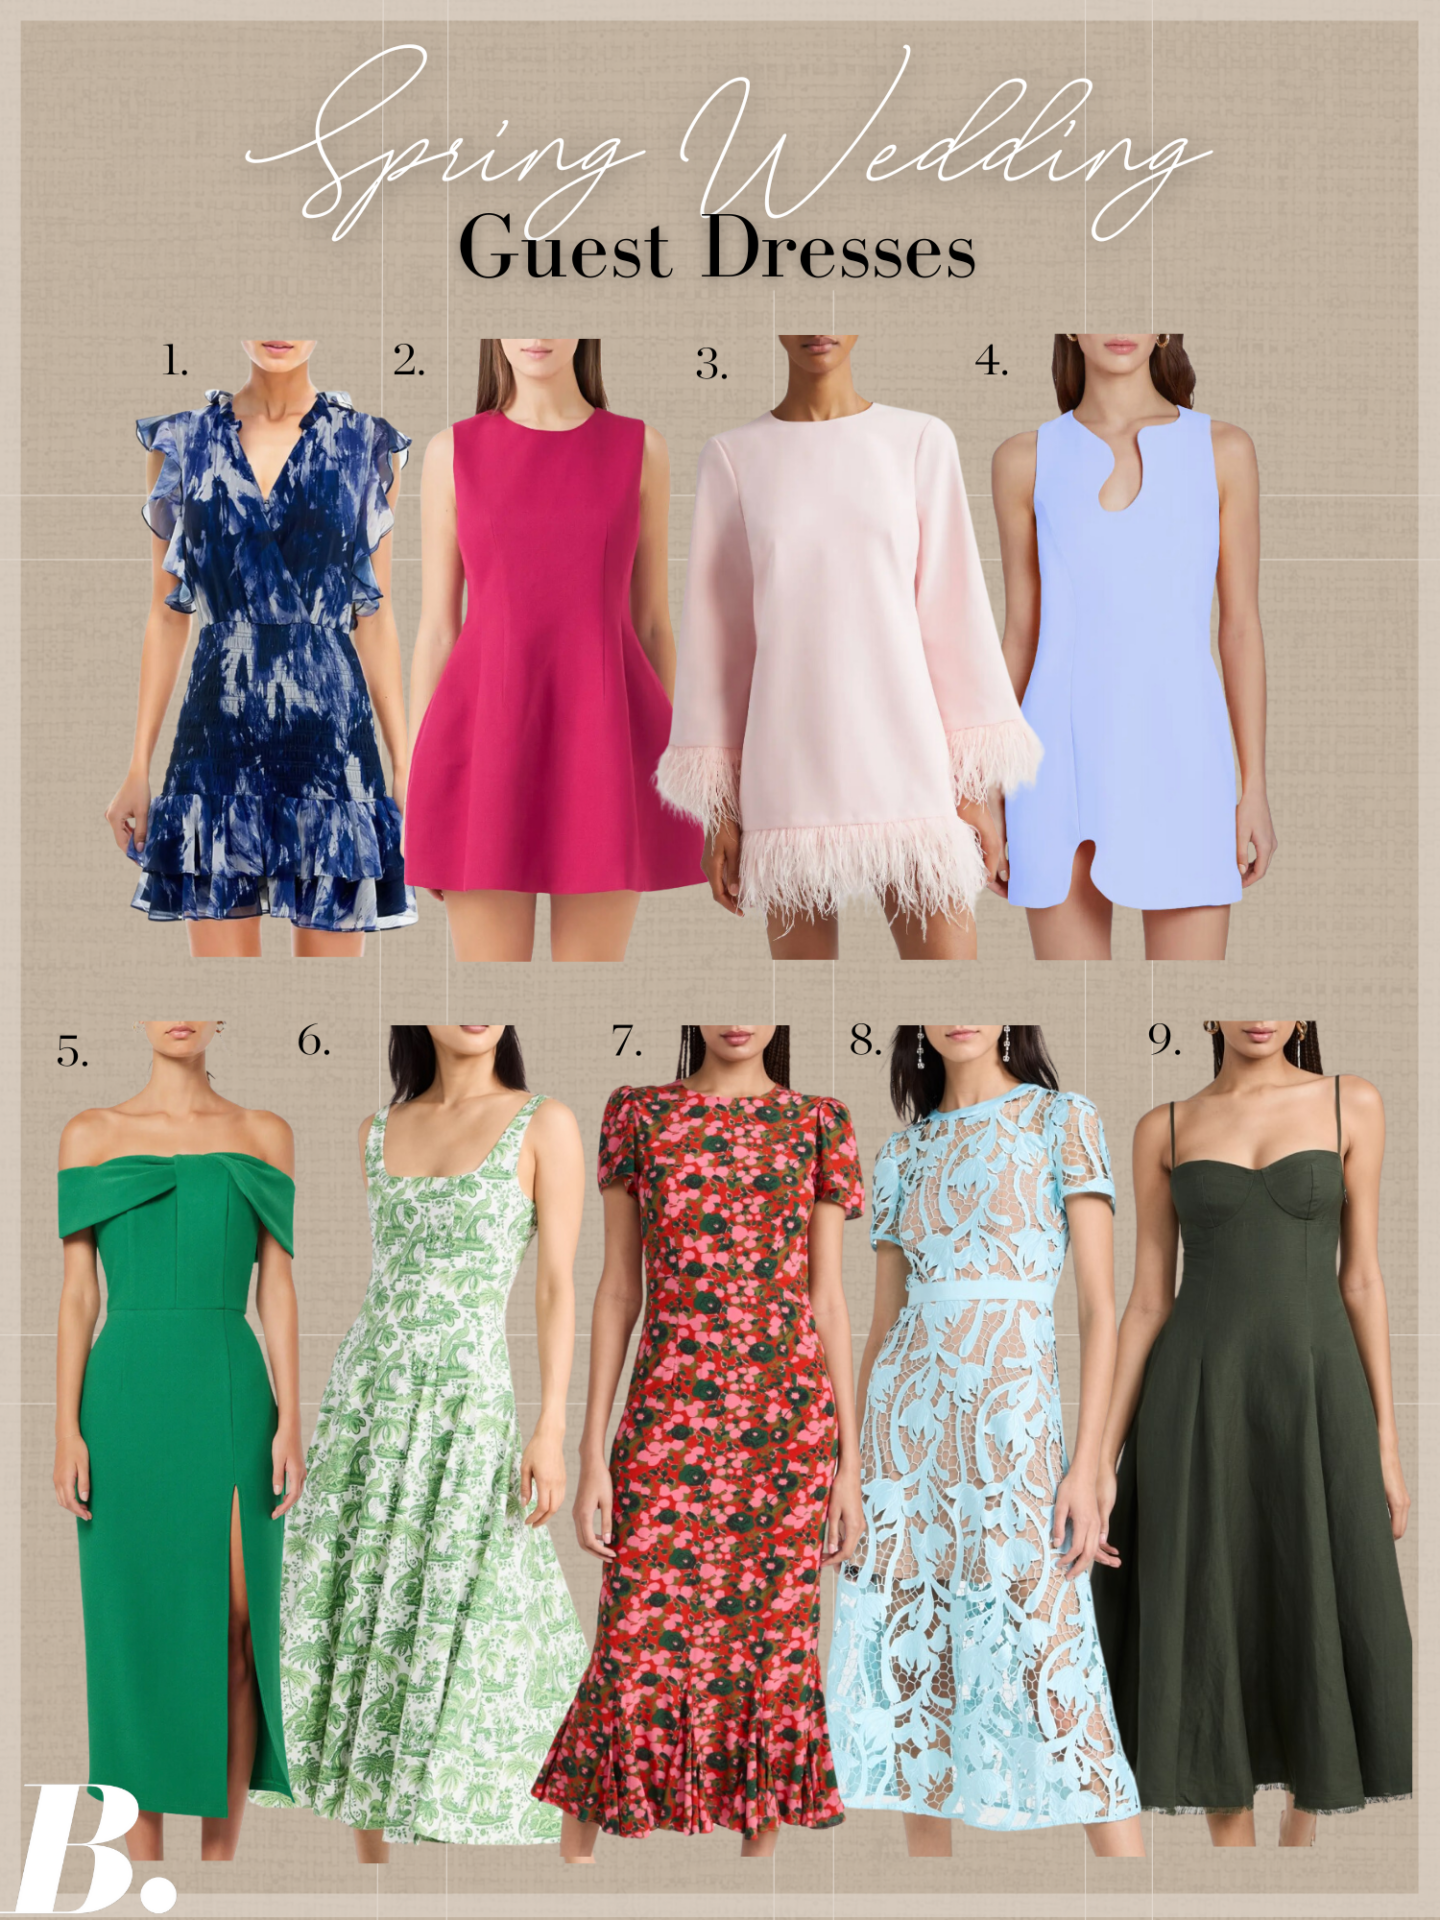 10 Beautiful Spring Wedding Guest Dresses for Every Budget